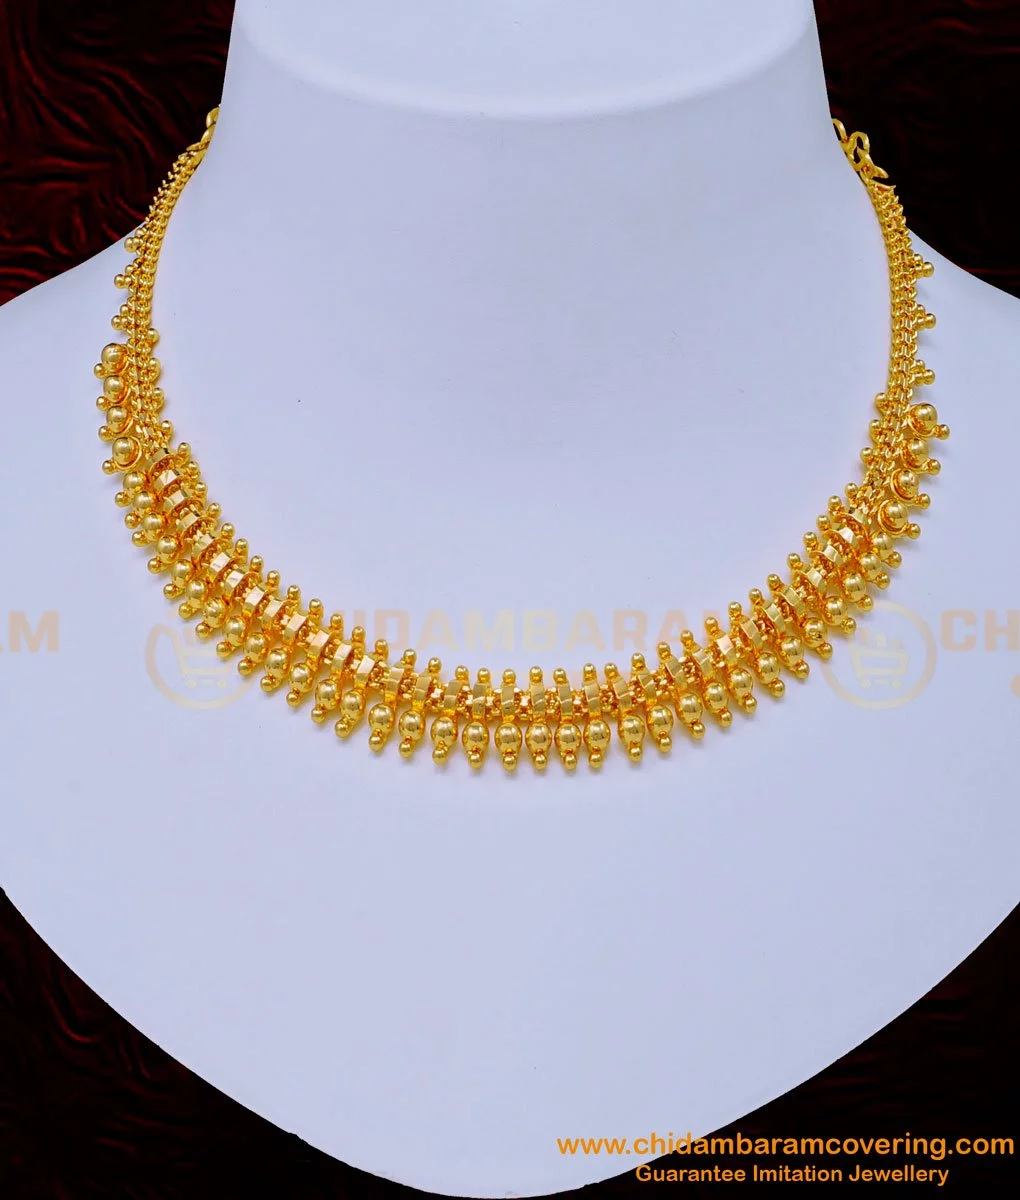 Jewelry | Bridal gold jewellery designs, Indian bridal jewelry sets, Modern gold  jewelry